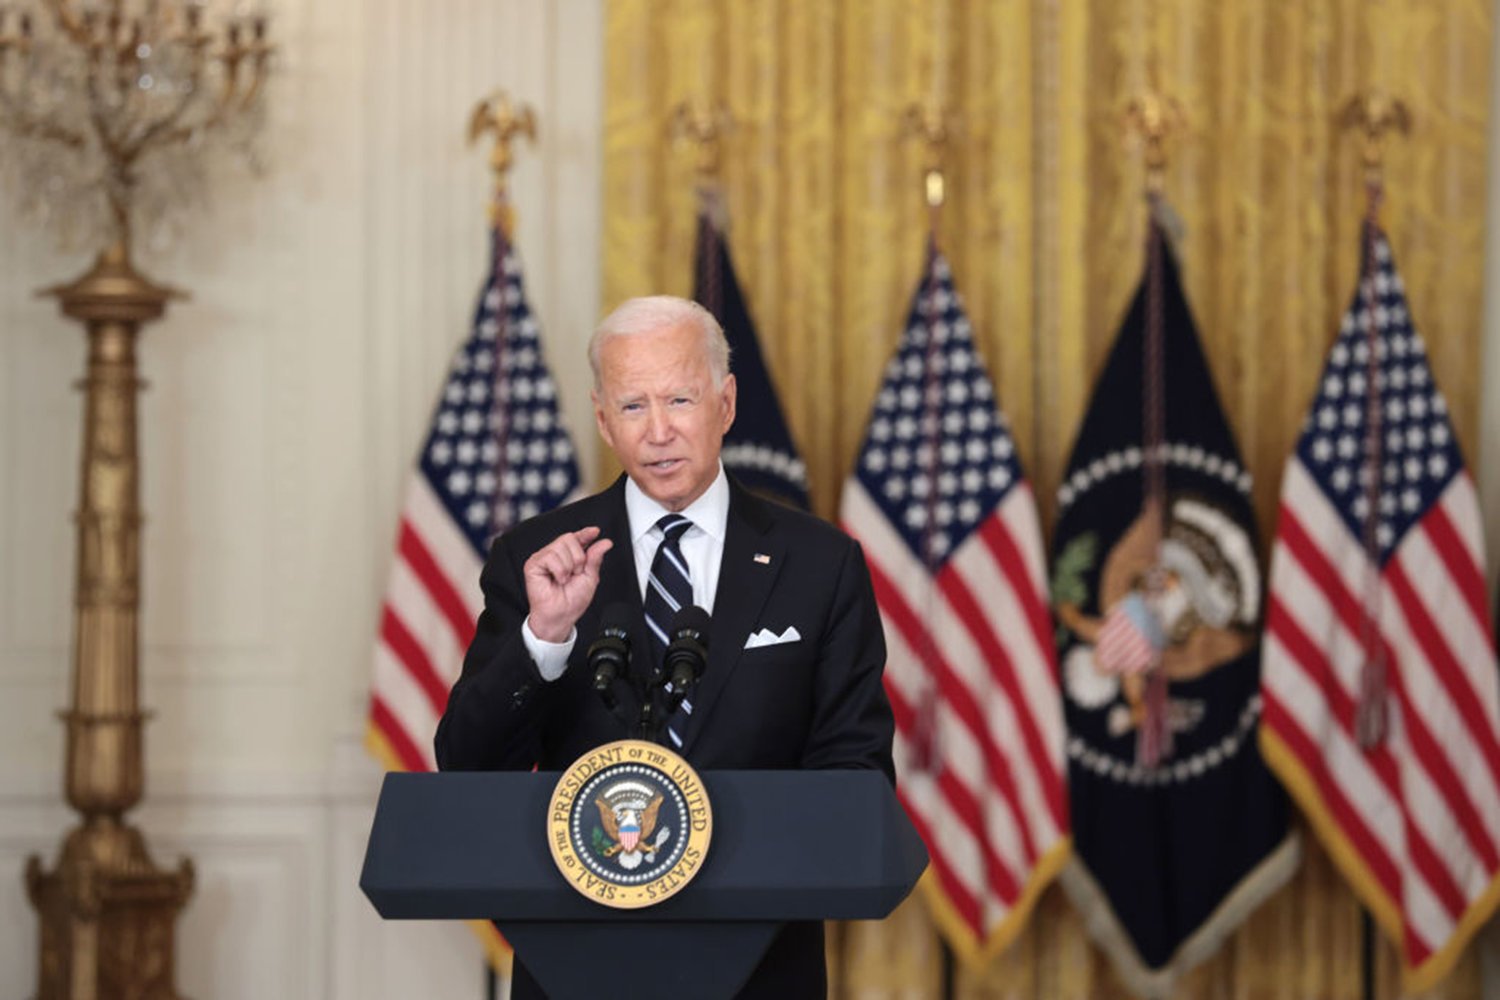 U.S. President Joe Biden gestures as he delivers remarks on the COVID-19 response and the vaccination program in the East Room of the White House on August 18, 2021 in Washington, DC. (Anna Moneymaker/Getty Images/TNS)